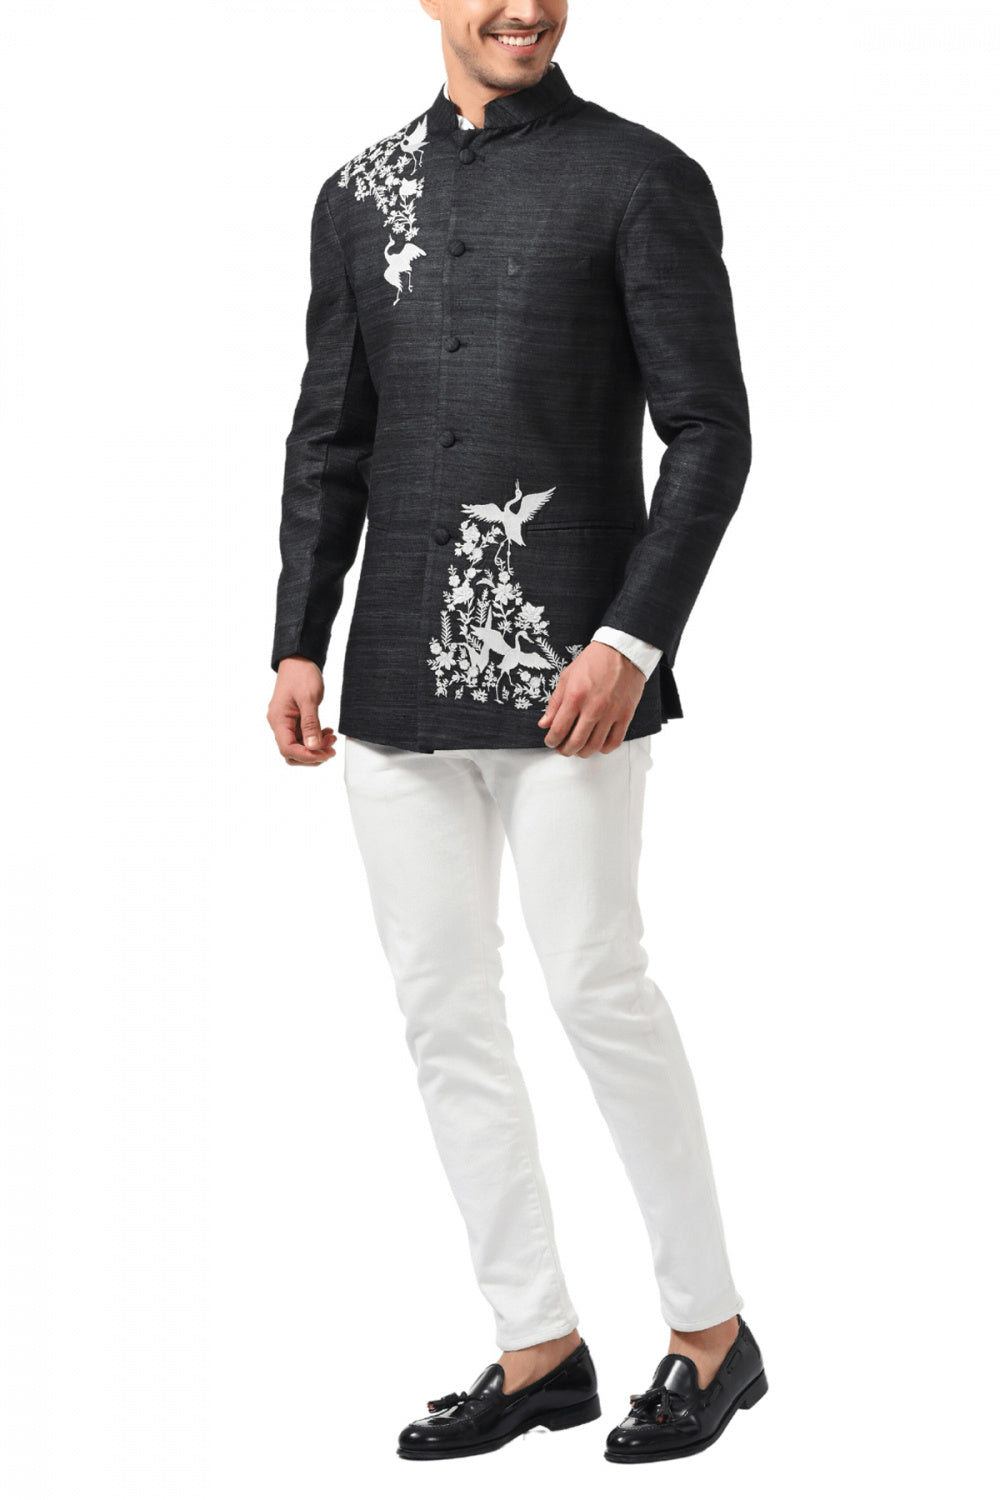 Men's MC 111 Black Bird Embroidery Prince Coat - Available at MashalCouture.com